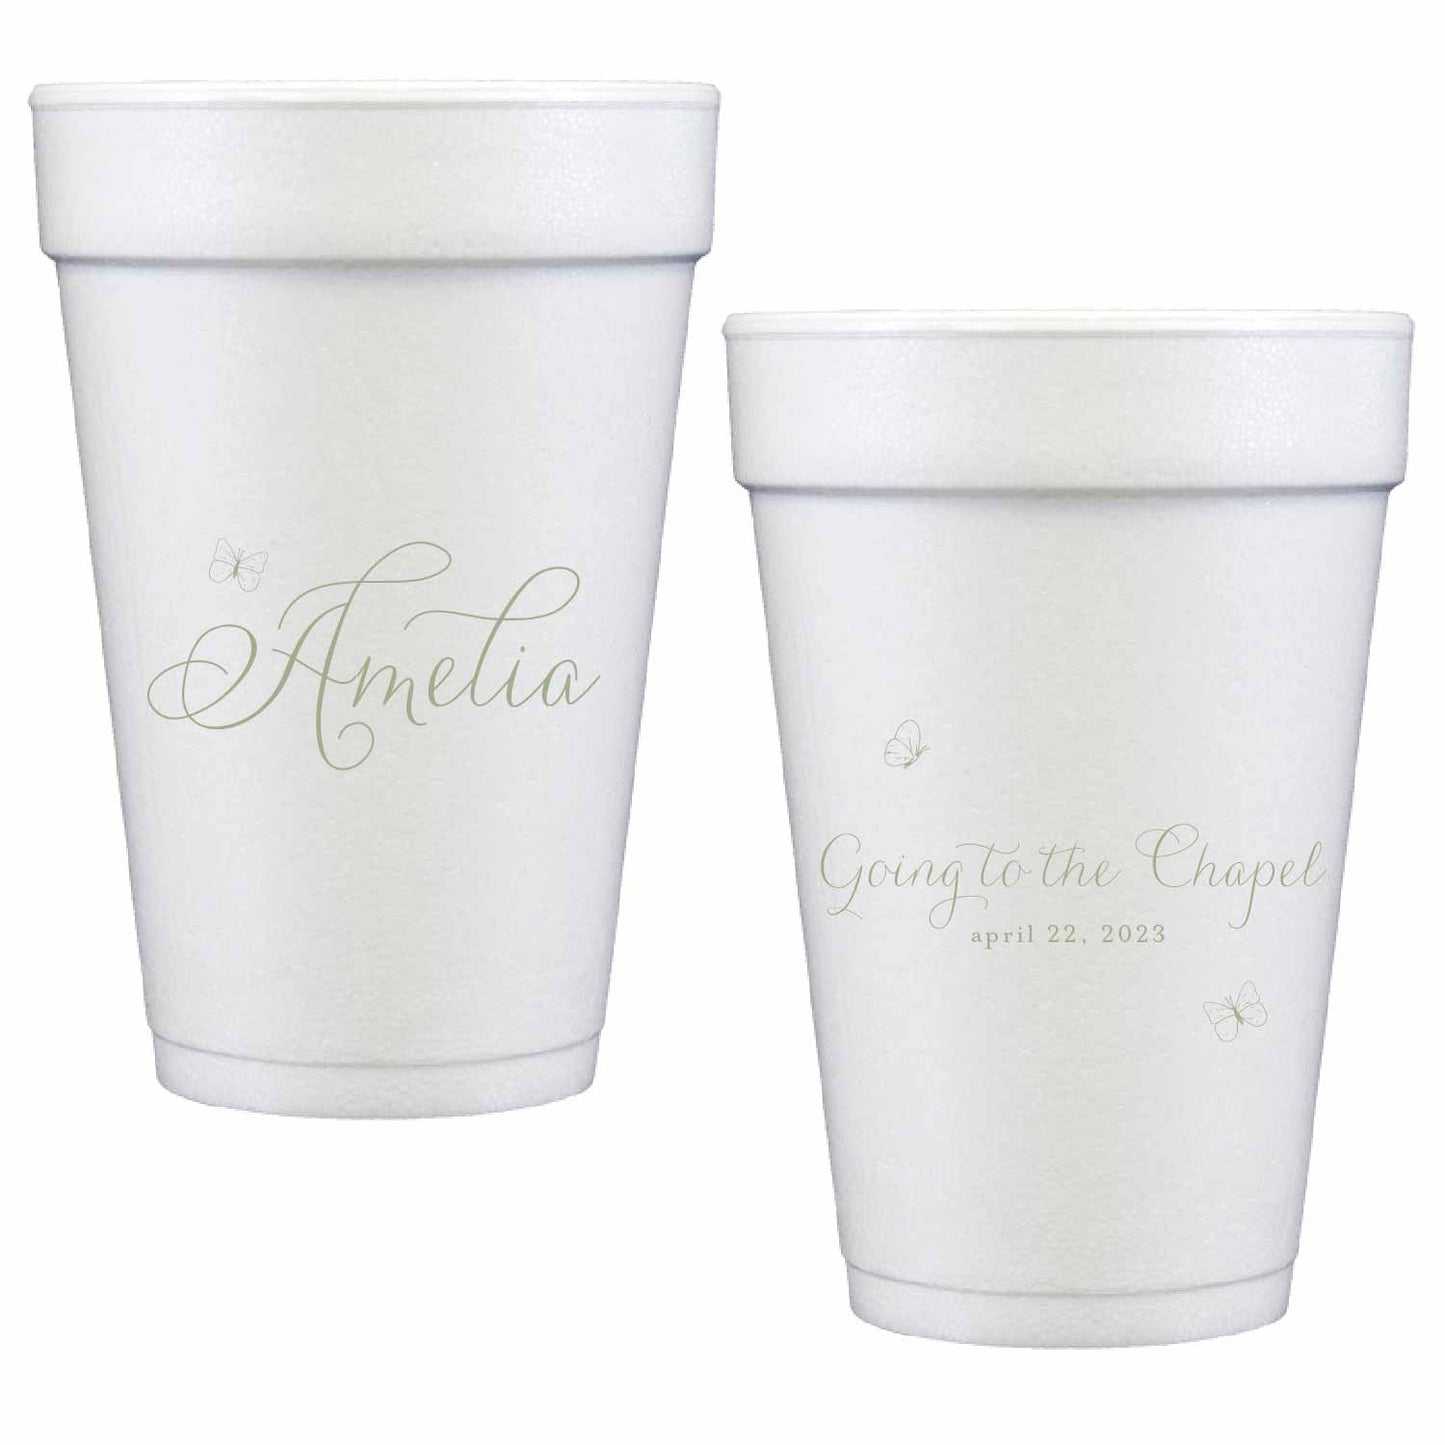 rosemary personalized styrofoam cup